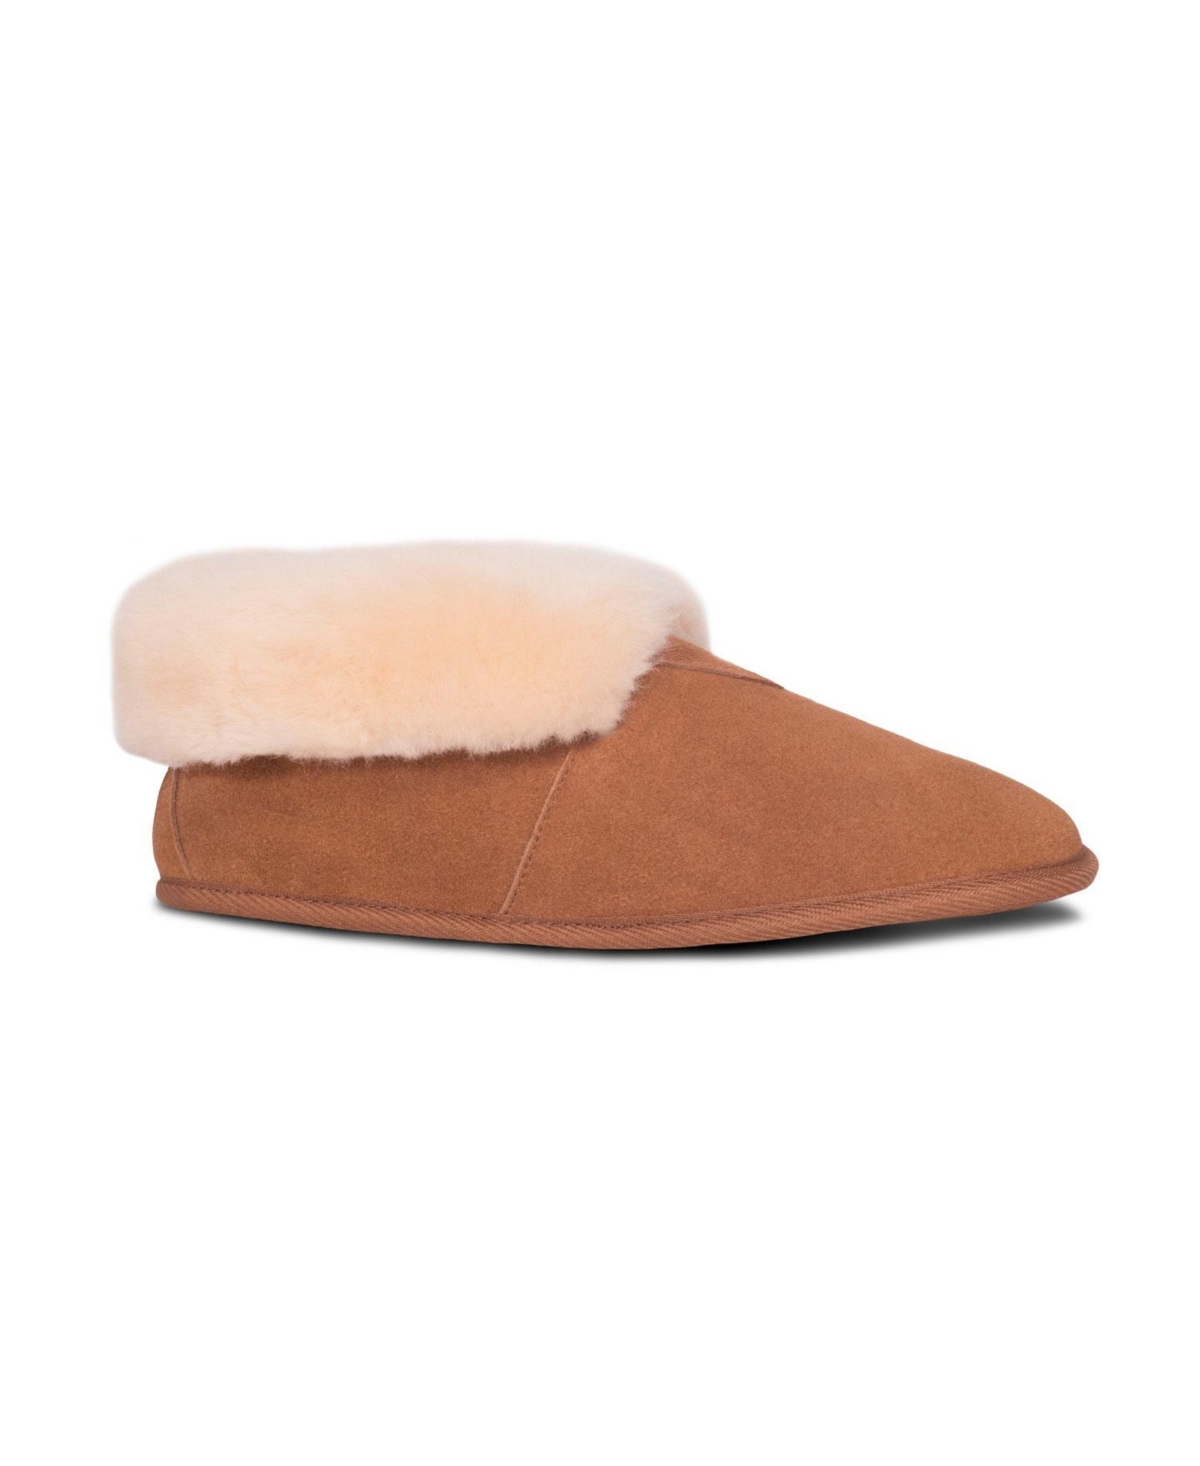 Ladies Soft Sole Booties Slippers - Chestnut